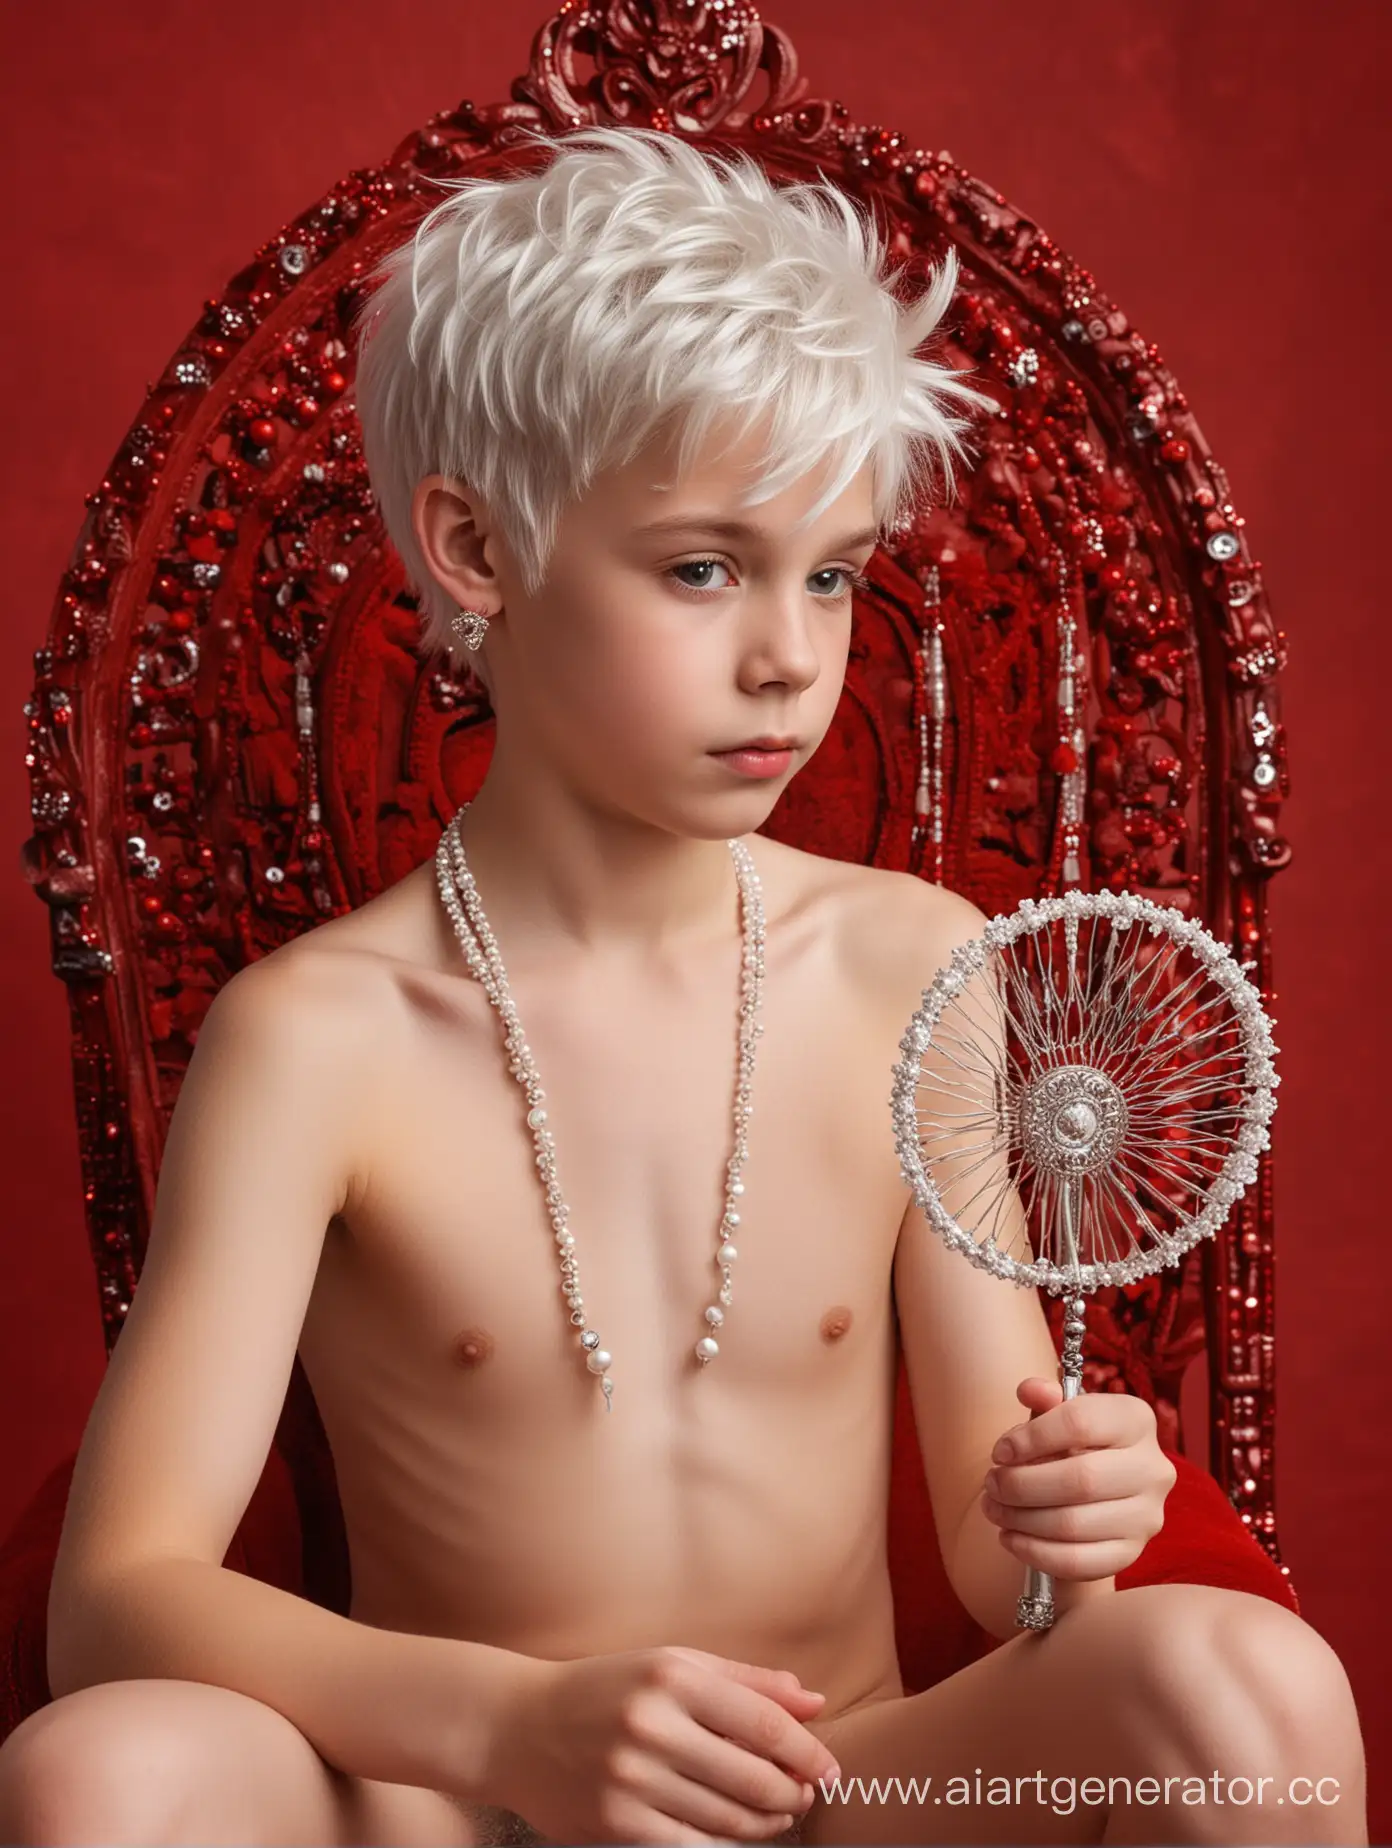 12YearOld-Boy-with-ModelLike-Appearance-on-Red-Throne